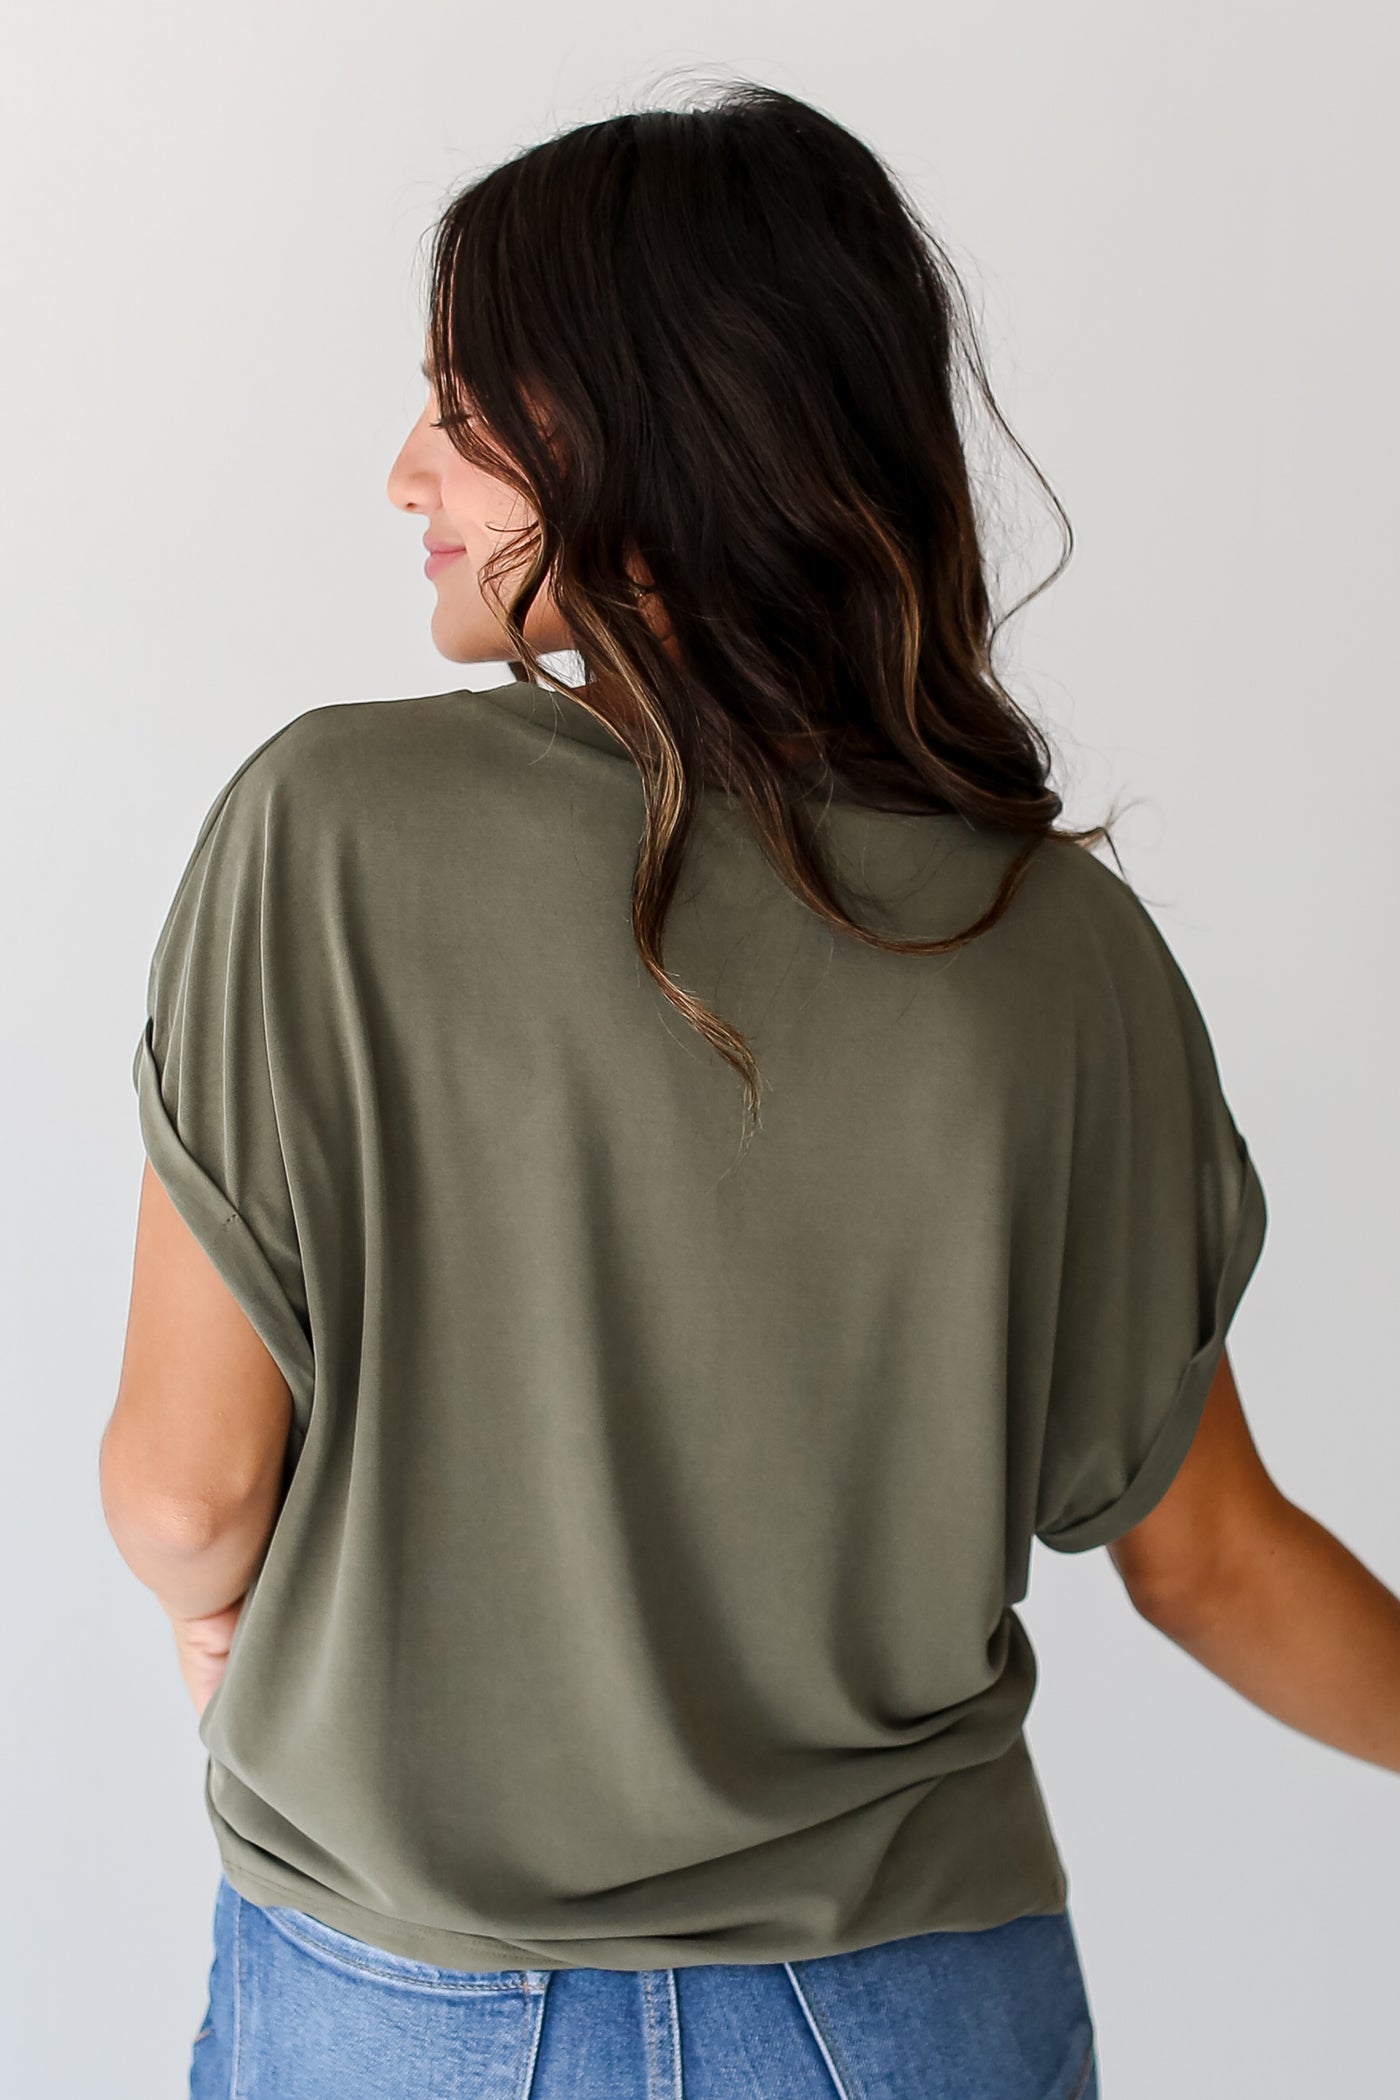 olive Tee back view